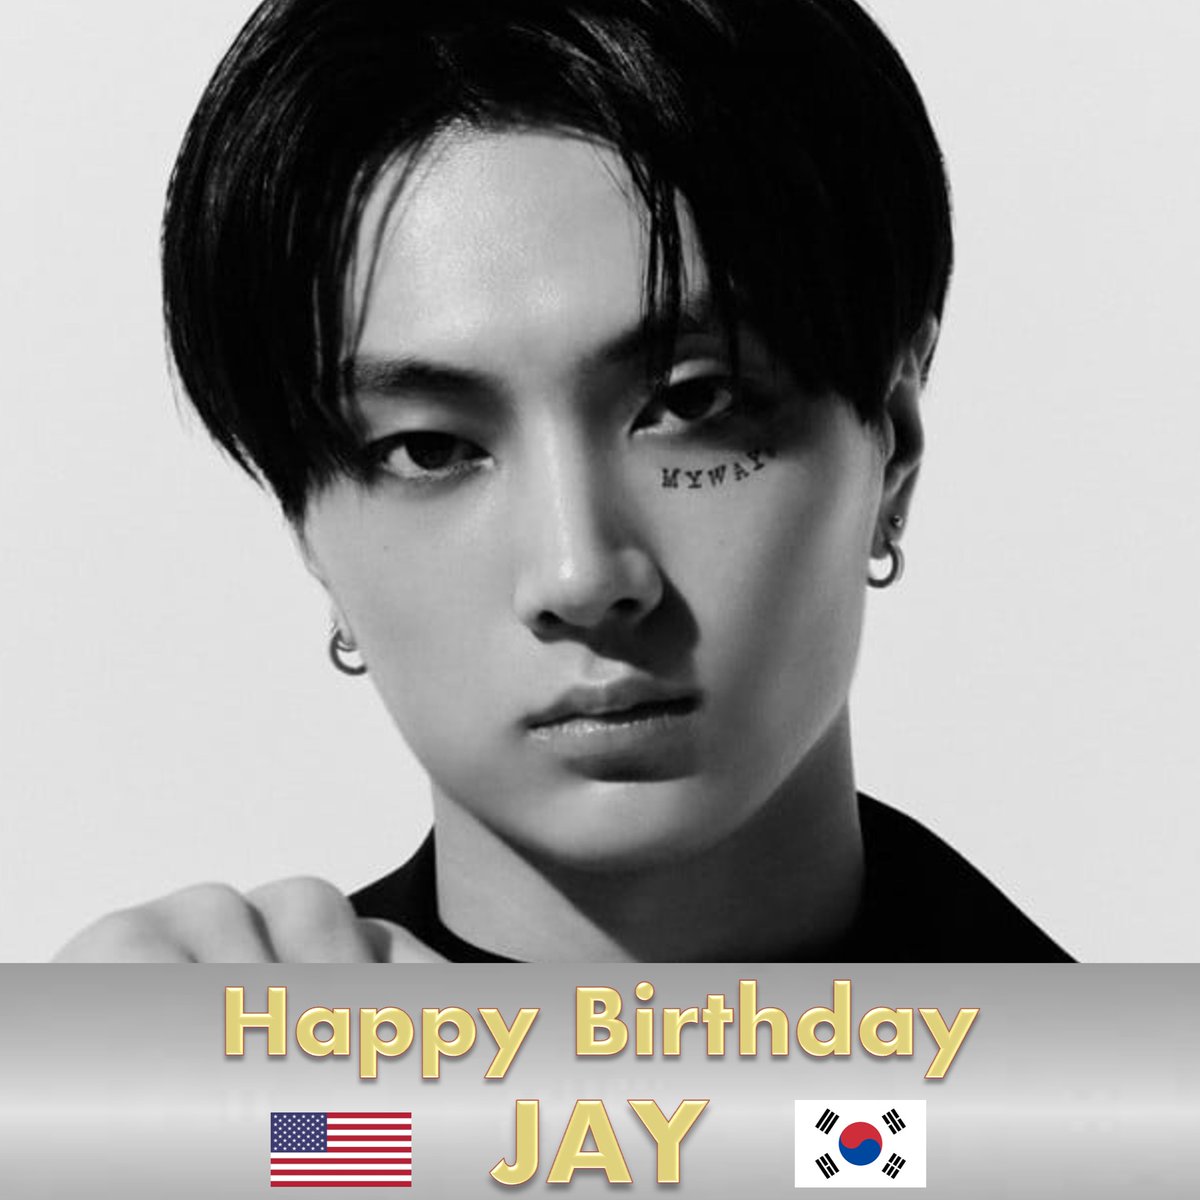 Happy 22nd birthday to #ENHYPEN's very handsome and extremely talented Rapper, singer, dancer and trend-setter Jay! Jay rings in his birthday trending in the Top 3 on X worldwide with #BlossomingSpringJAY and in the Top 4 with HappyBirthJAY! #Jay found fame as the Main Rapper,…